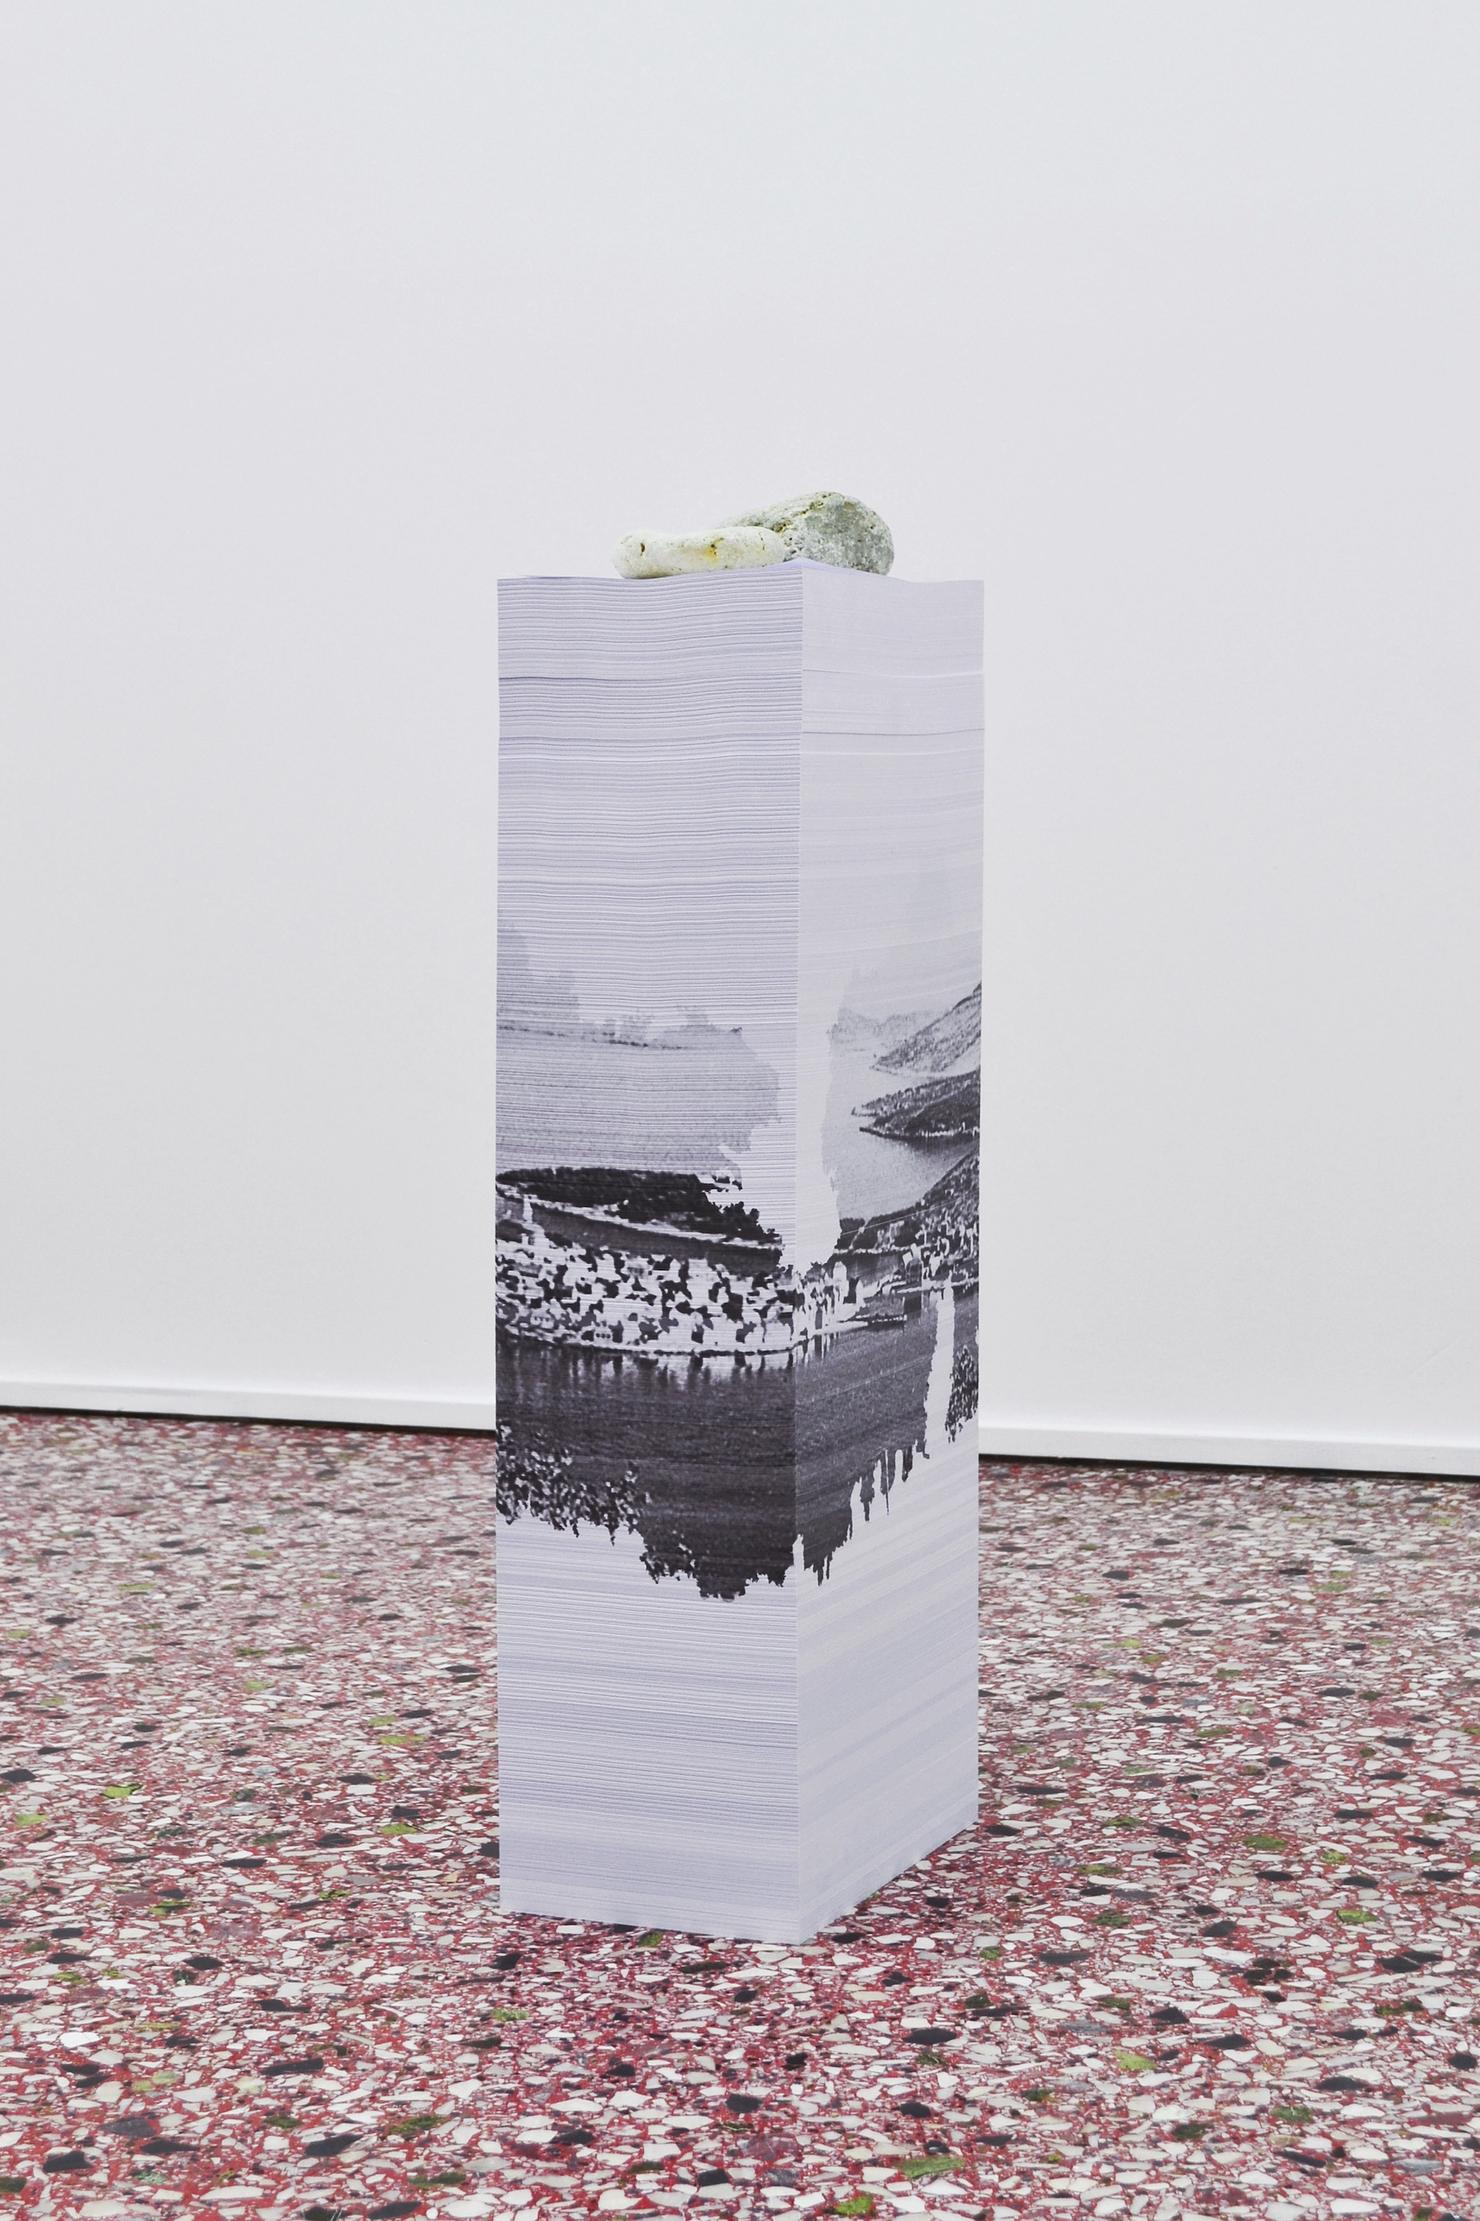 A single paper-stack sculpture comprised of A4 sheets of paper piled into columns in a red terrazzo floor and surrounded by white walls. A black and white landscape image is formed on the lateral sides of the stack.